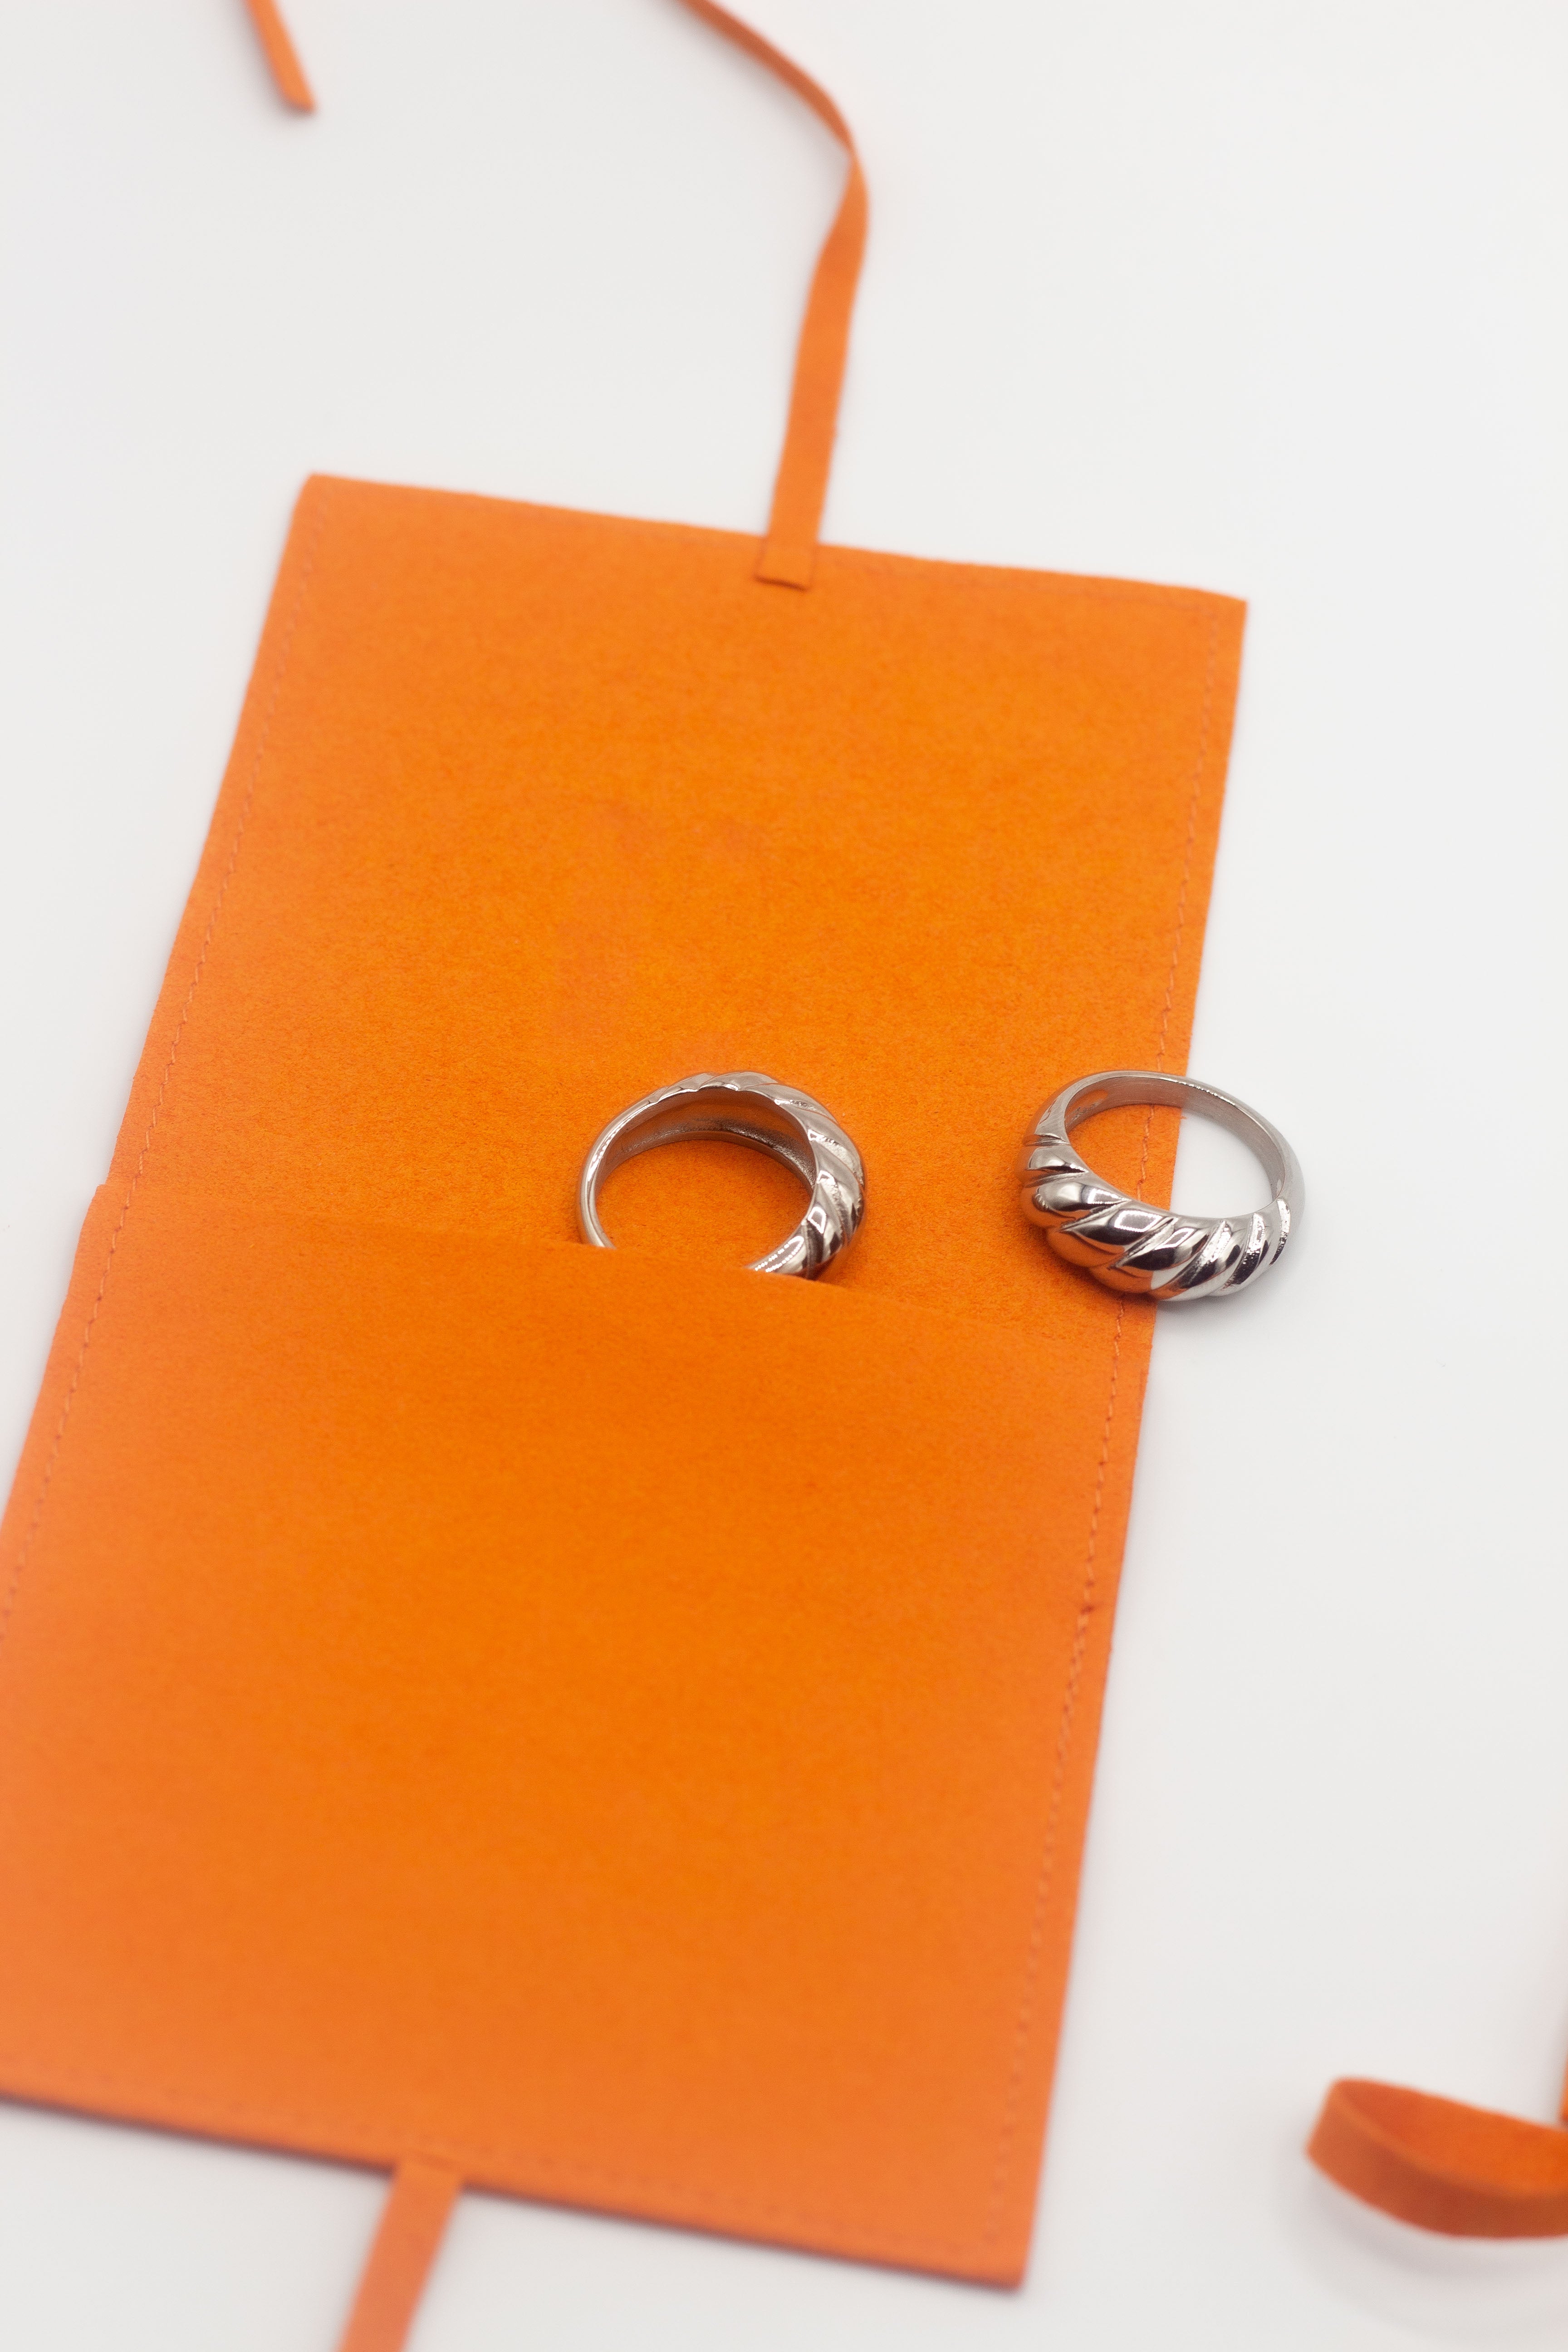 18k silver croissant shaped rings placed inside an orange leather pouch. Thick Croissant Rings by E's Element.